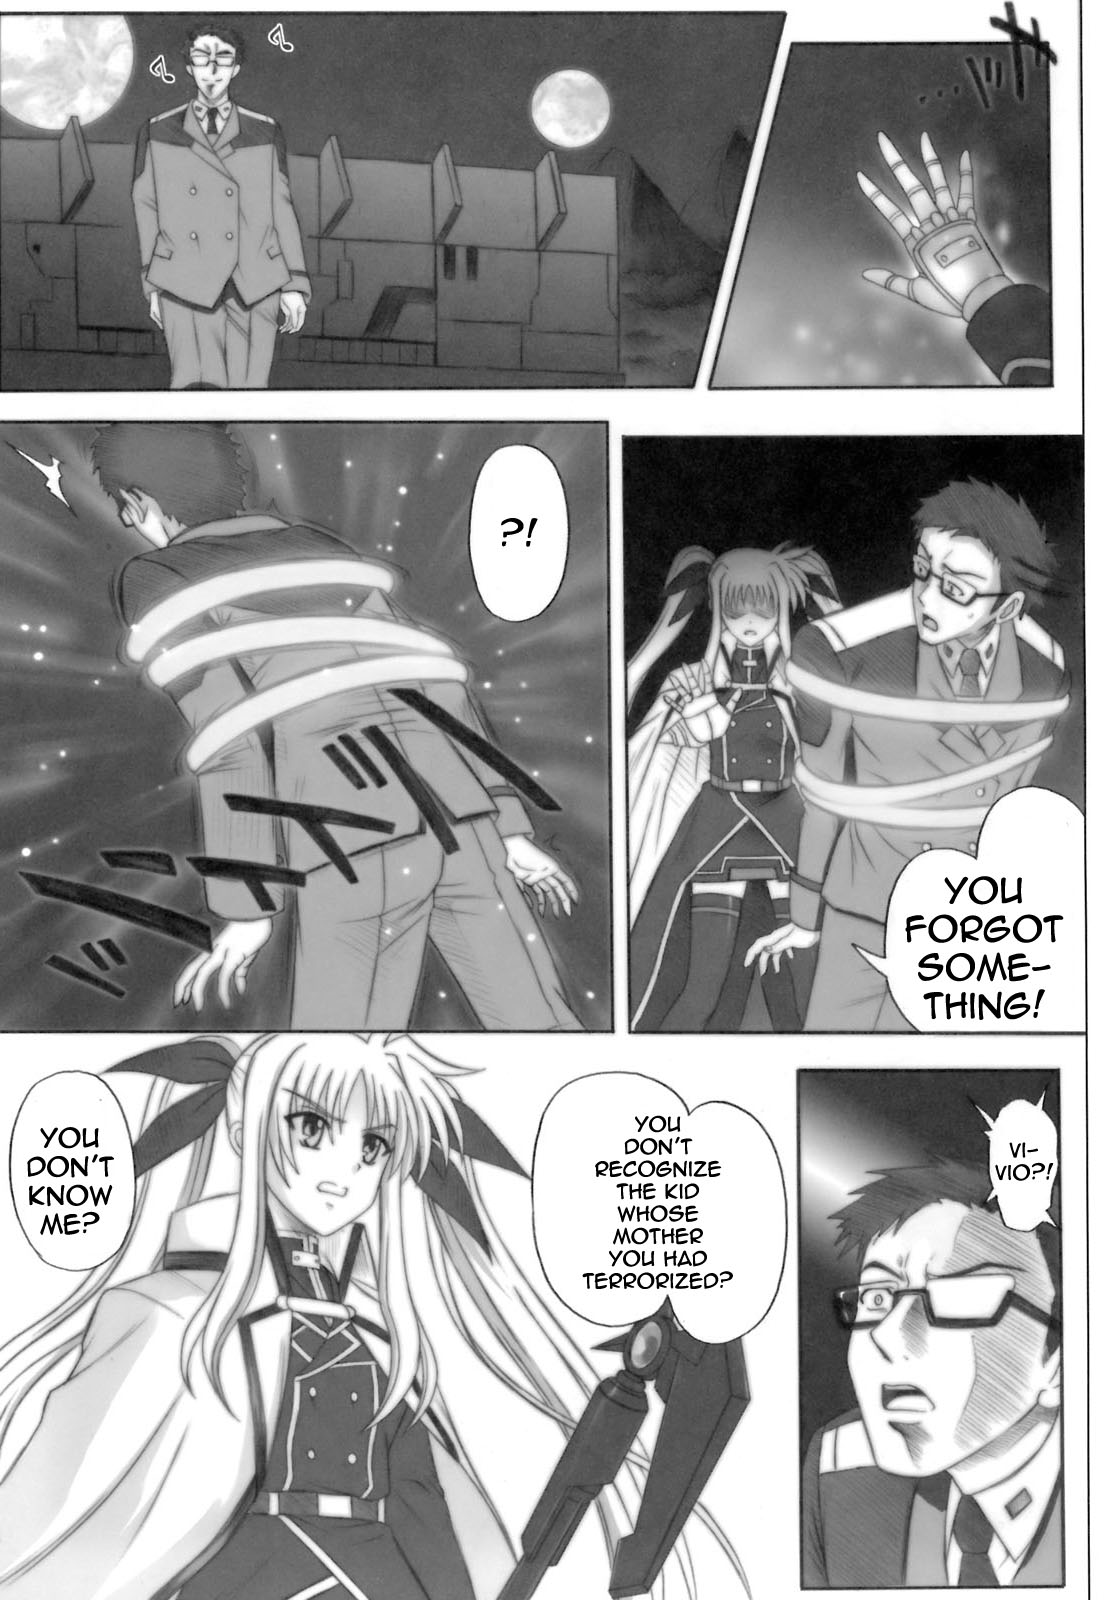 840 Color Classic Situation Note Extention (Mahou Shoujo Lyrical Nanoha) [English] [Rewrite] page 45 full